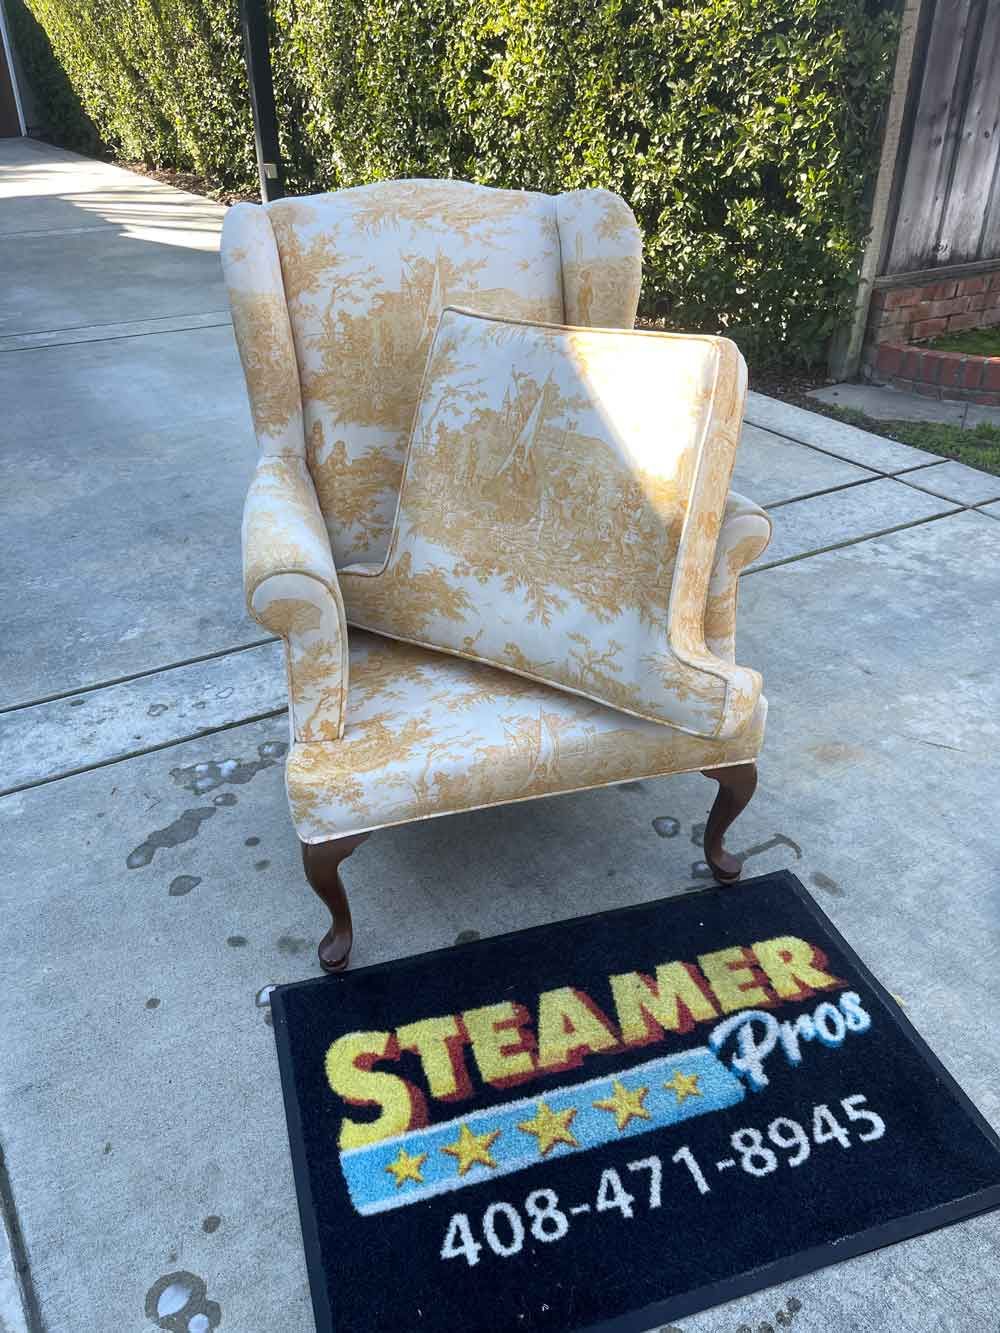 Steamer Pros Upholstery Cleaning